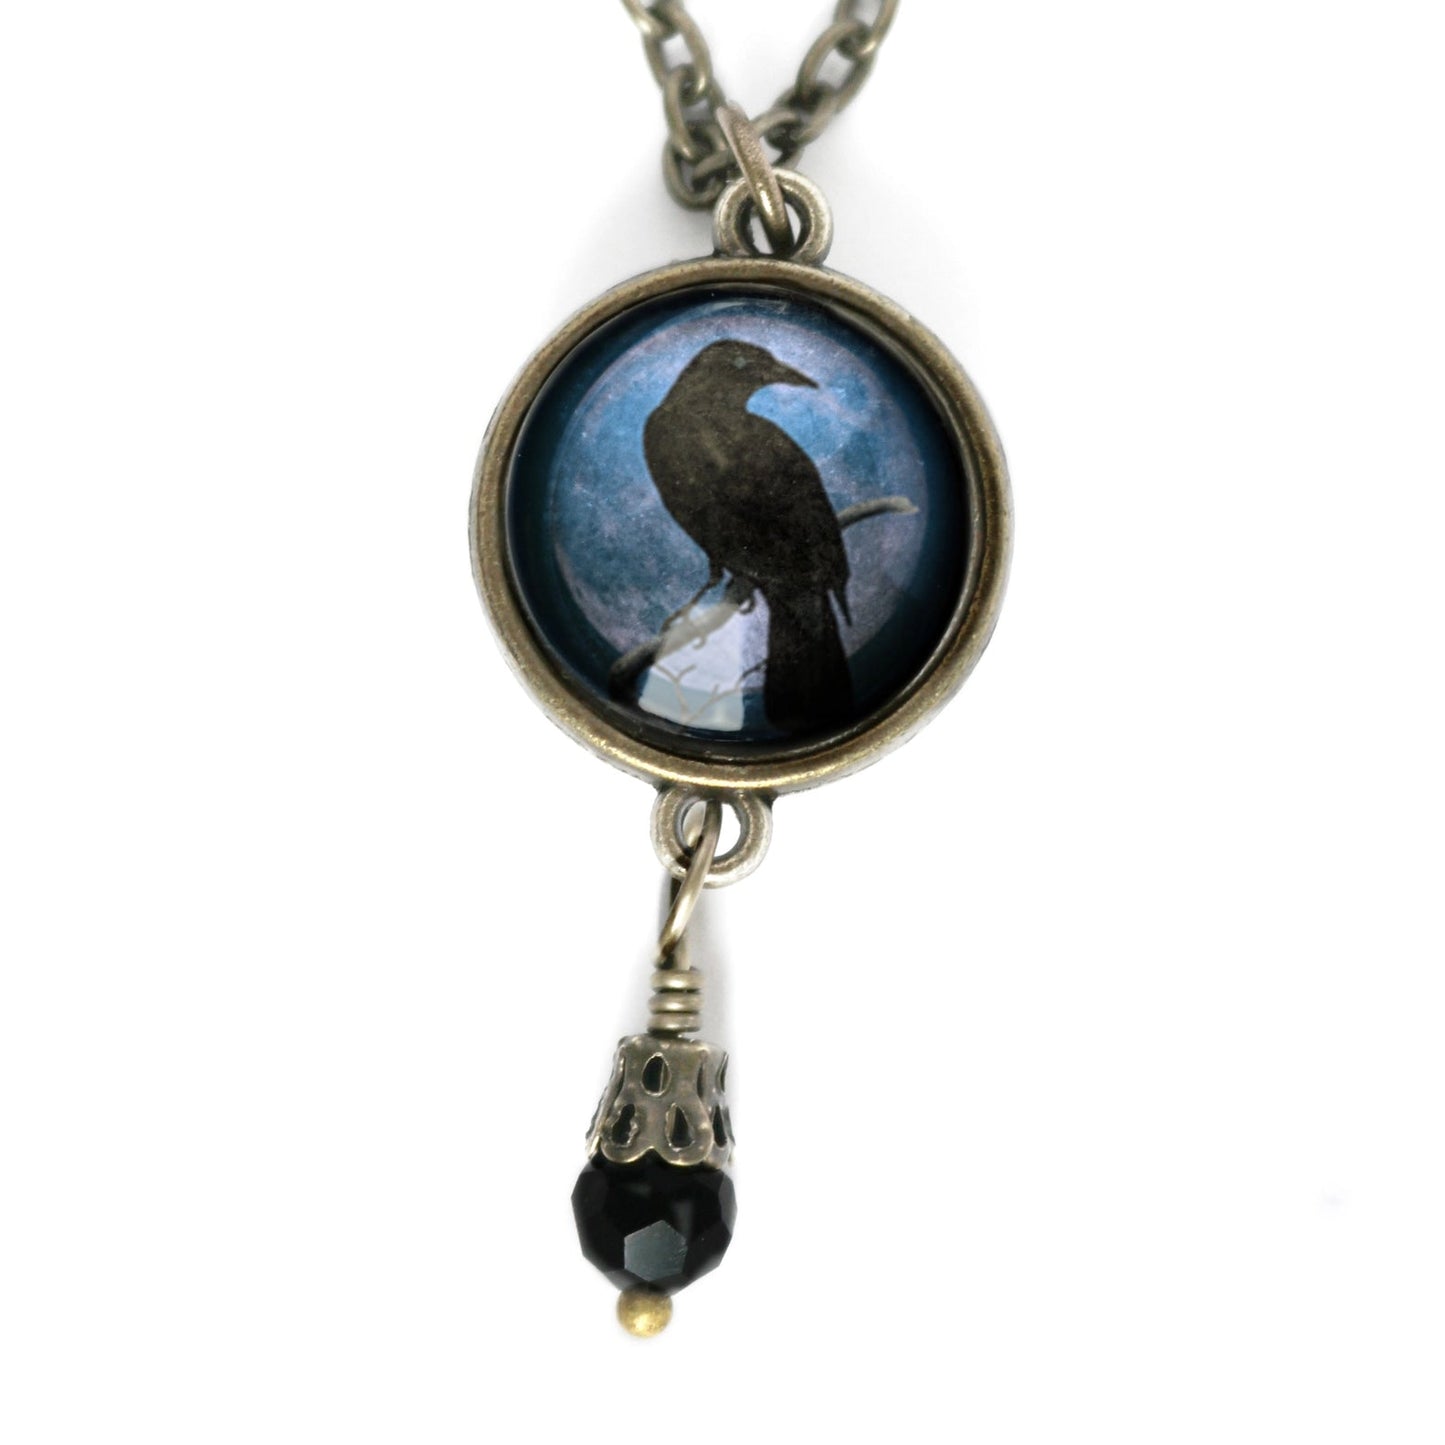 Purple Crow Goth Pendant Necklace w/ Bead | Handmade in the US